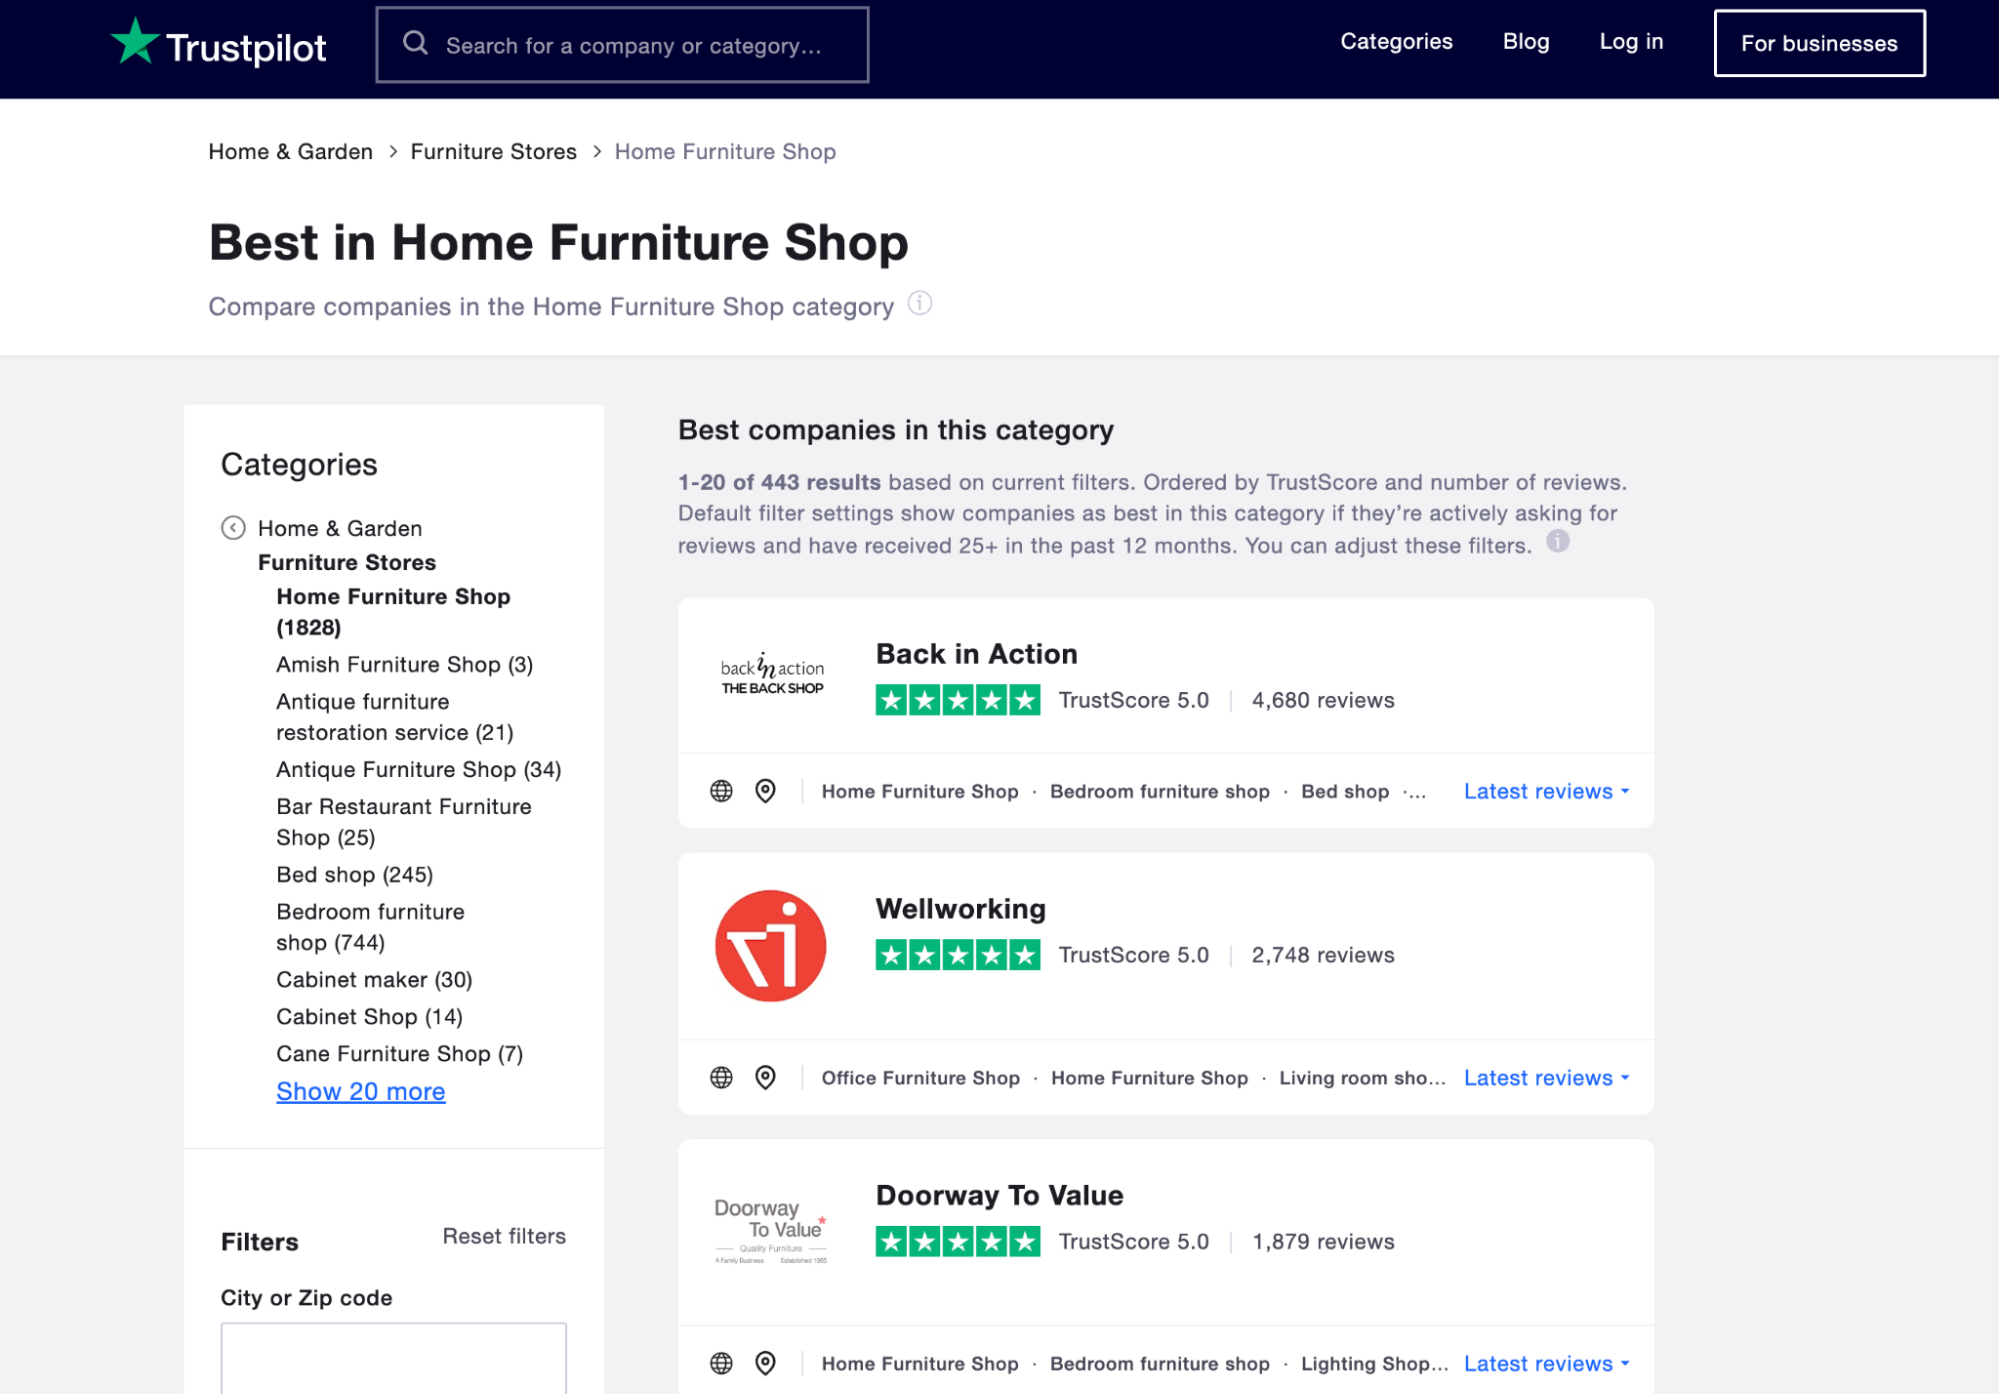 Trustpilot’s top rated home furniture shops based reviews and trust score.